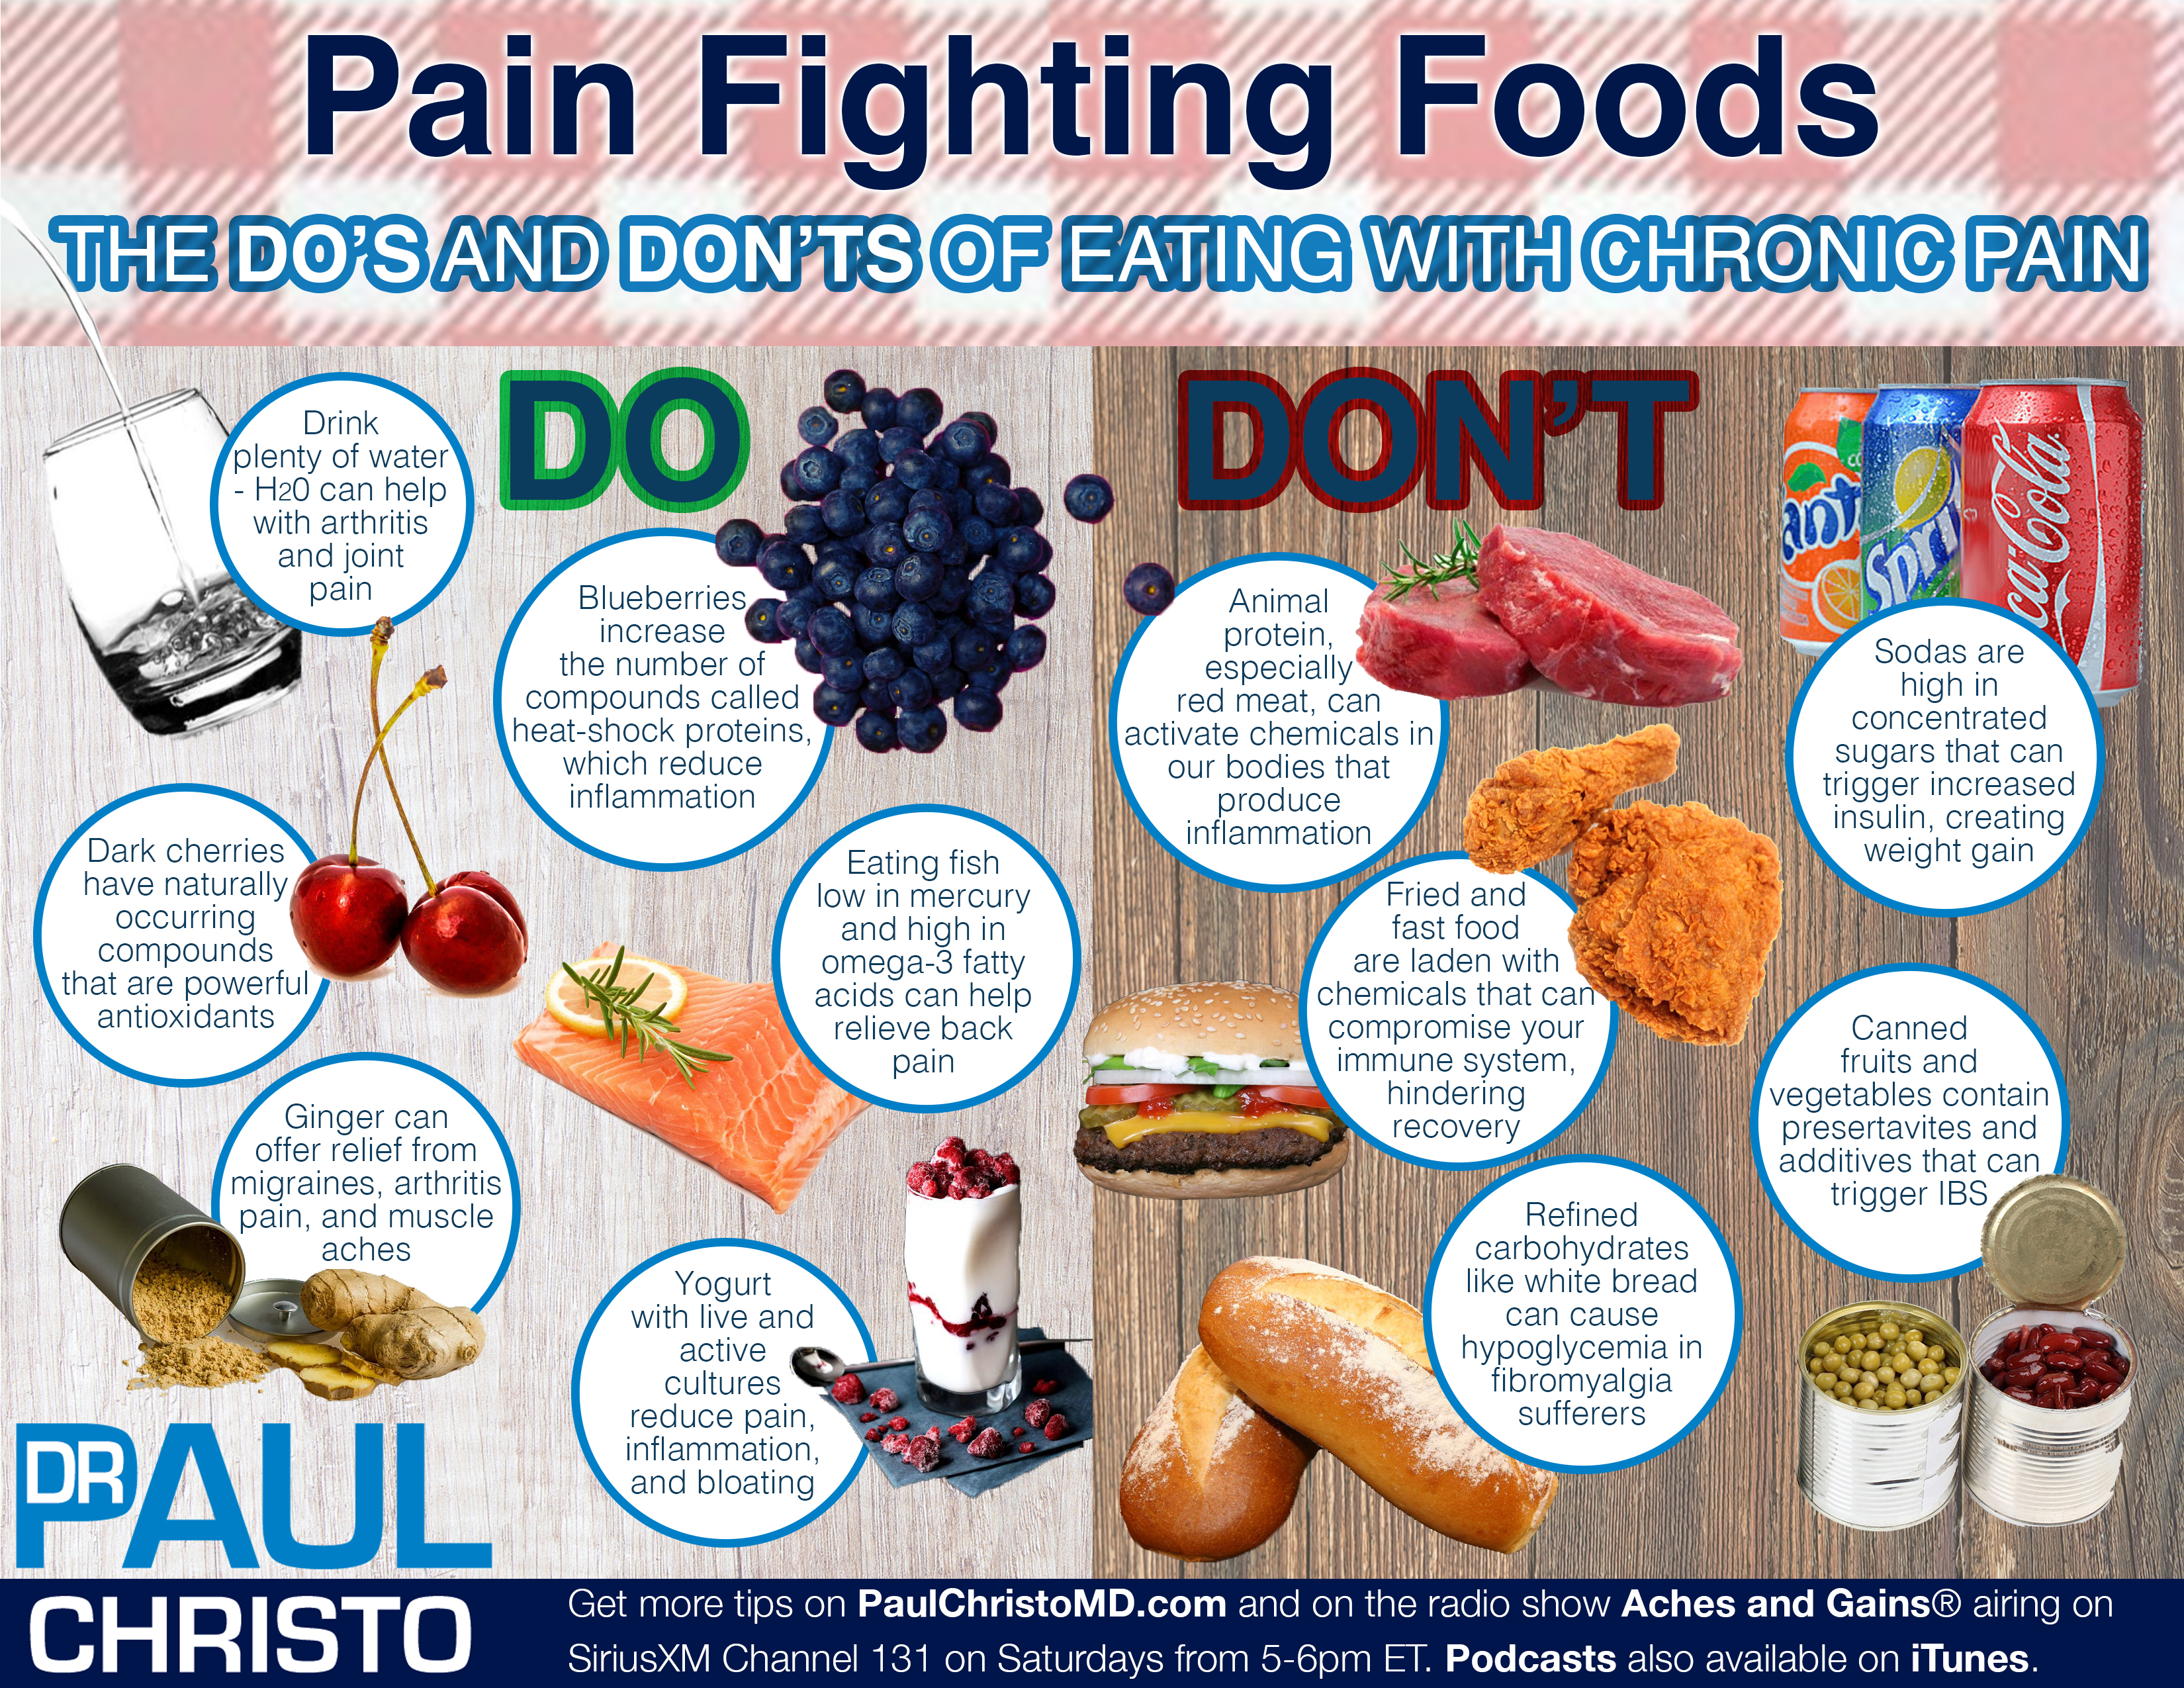 The Do's and Don'ts of Eating with Chronic Pain